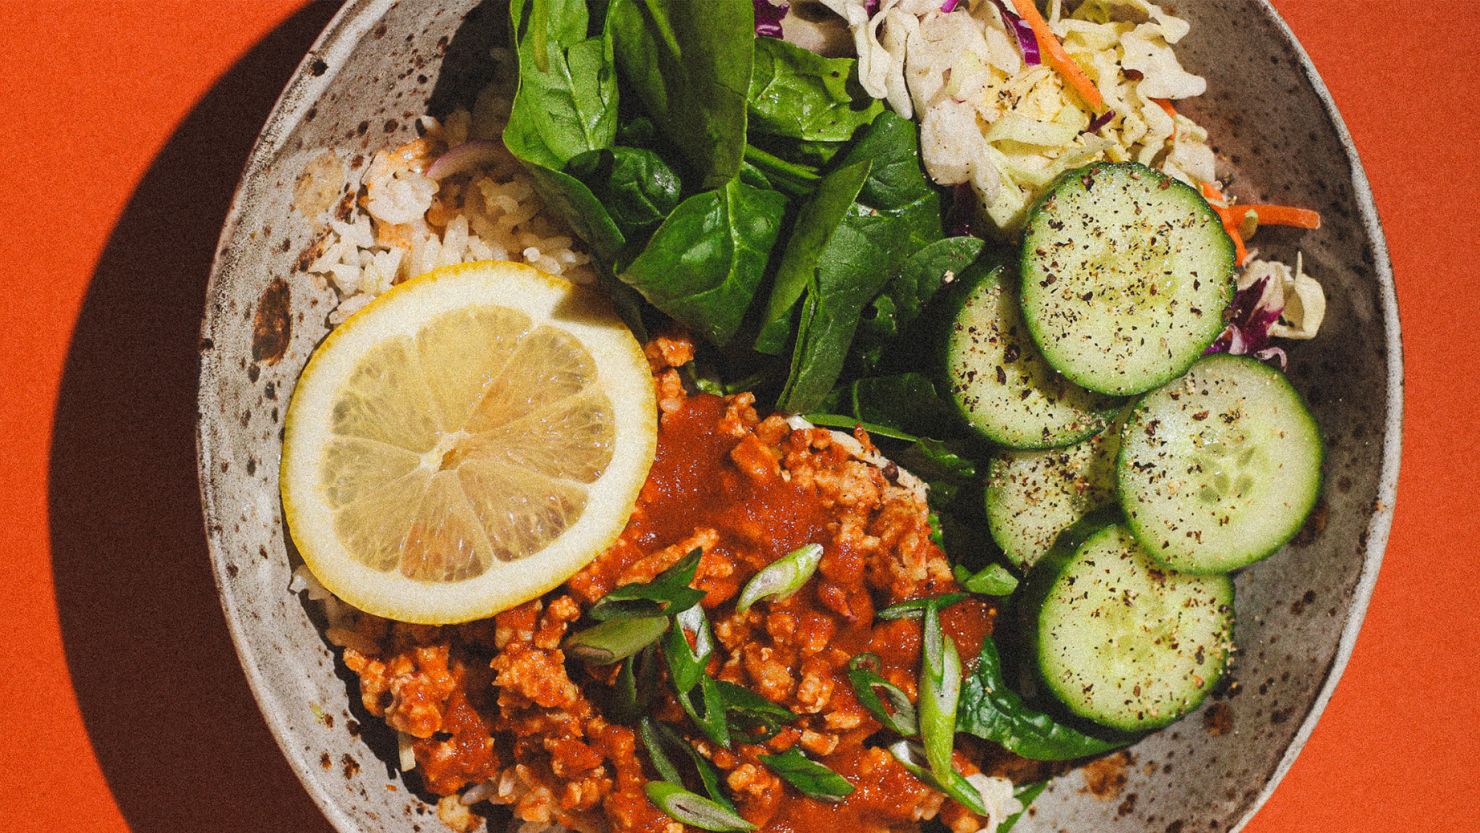 Using his 6 to 1 grocery hack, Chef Will Coleman made this sweet and spicy chicken bowl.